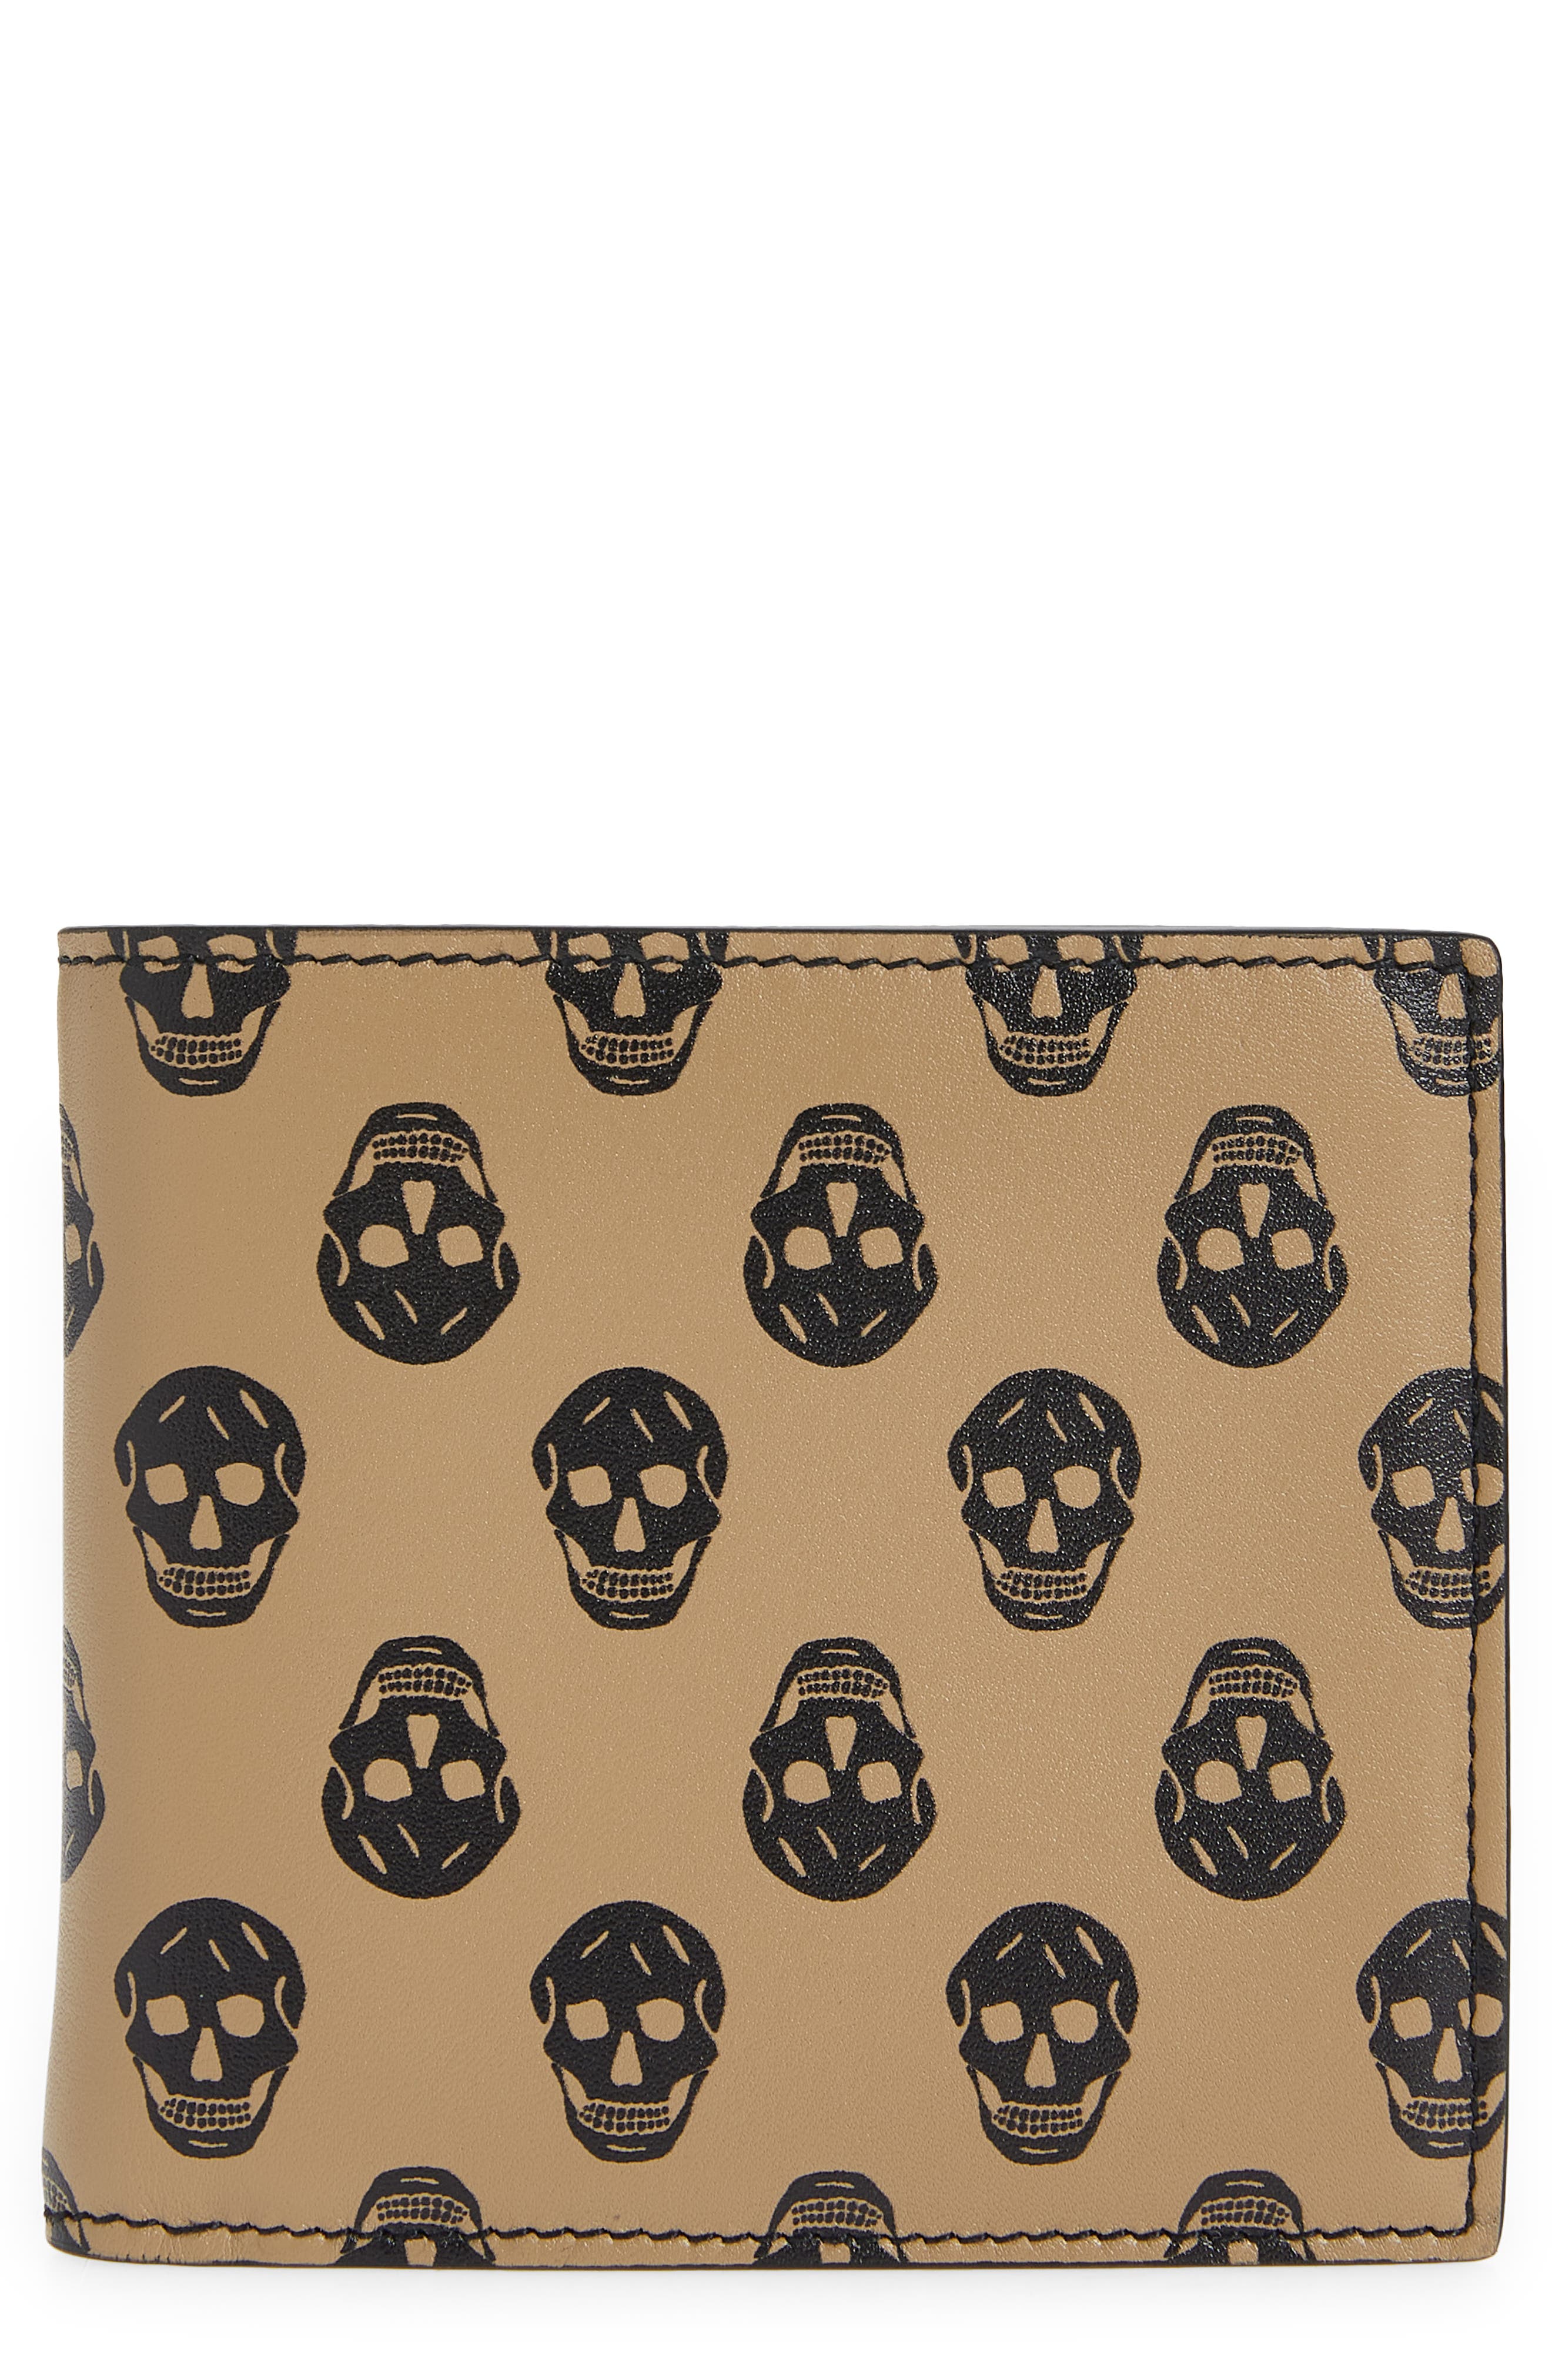 Alexander McQueen Skull-print Leather Wallet in Green for Men Mens Accessories Wallets and cardholders 